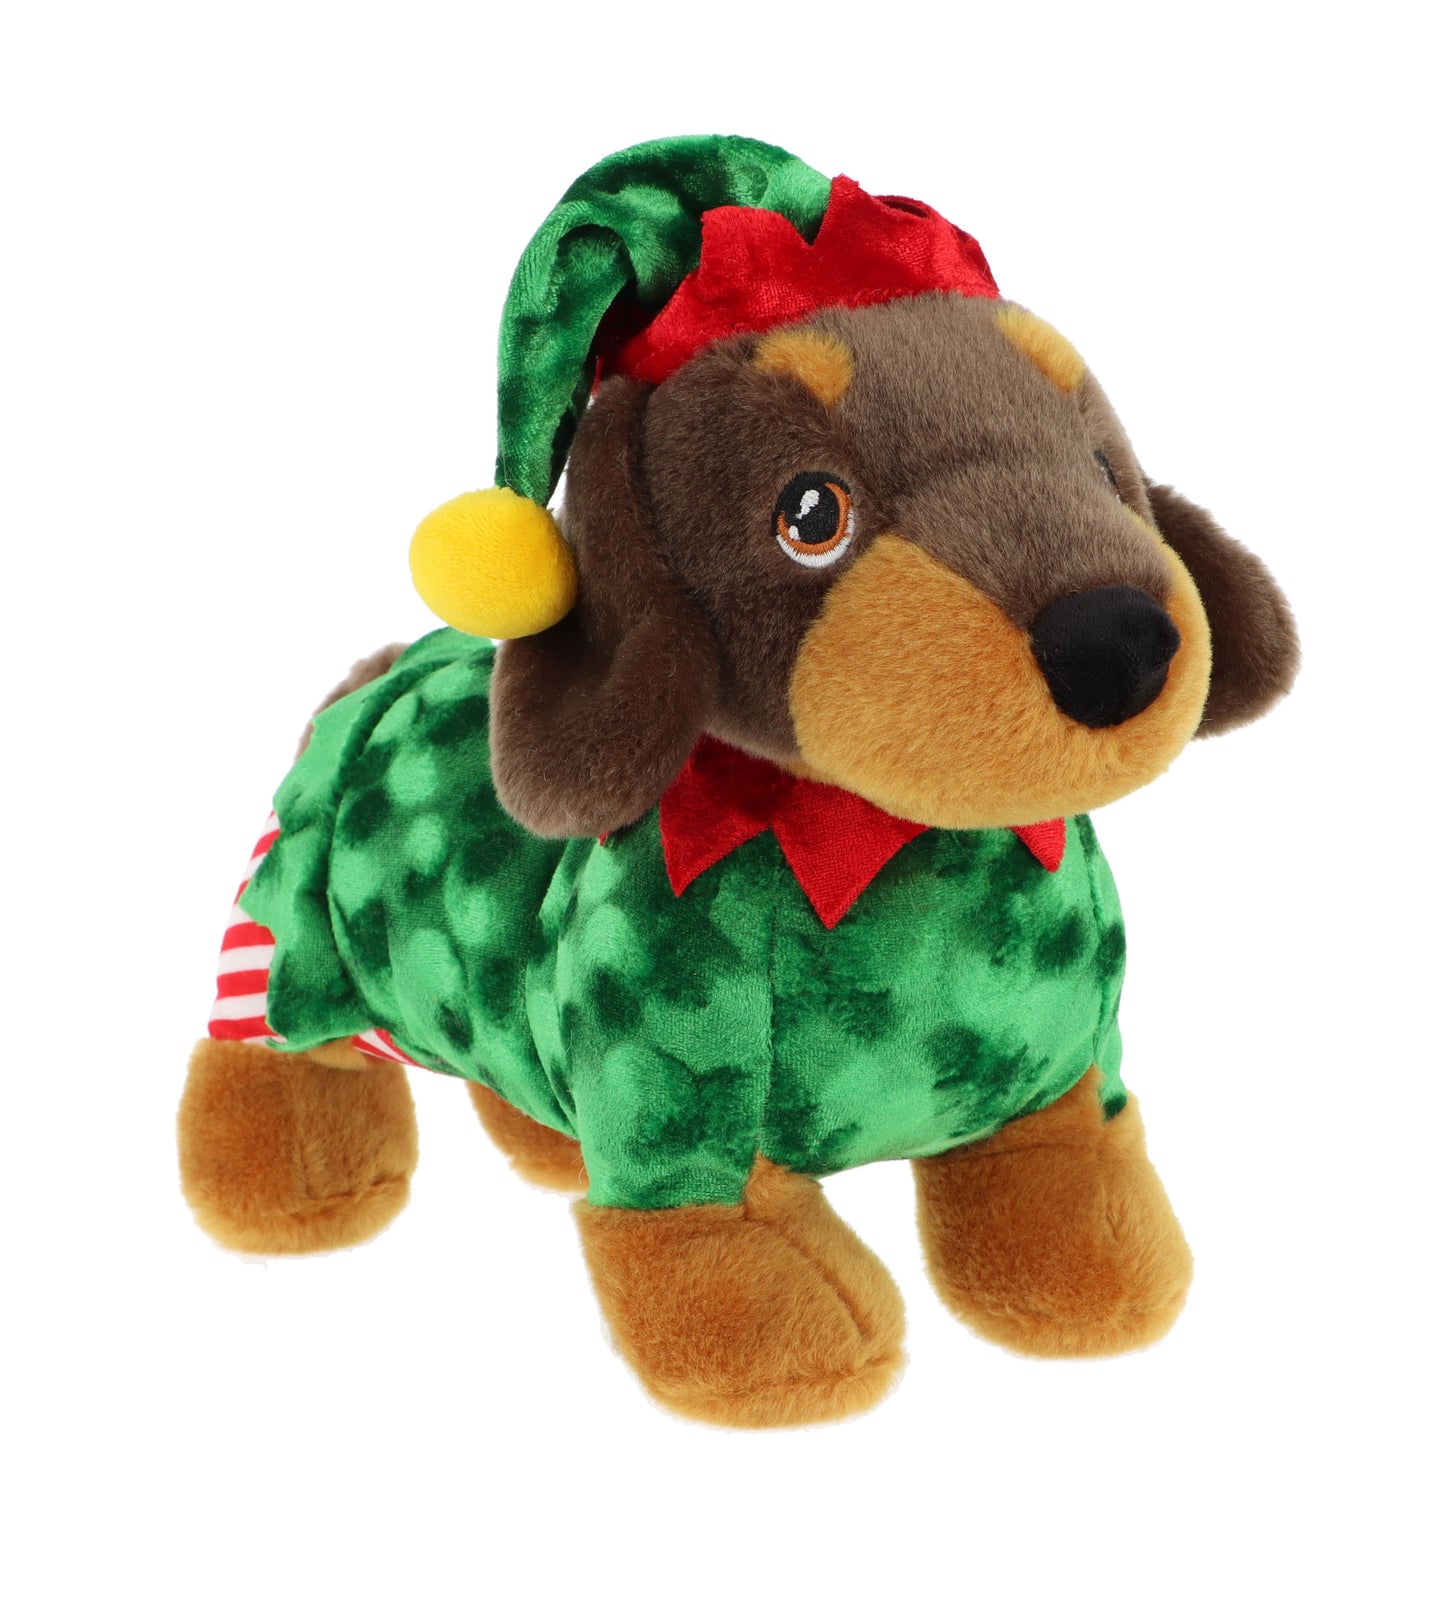 25cm Keeleco Dachshund in Christmas Outfit